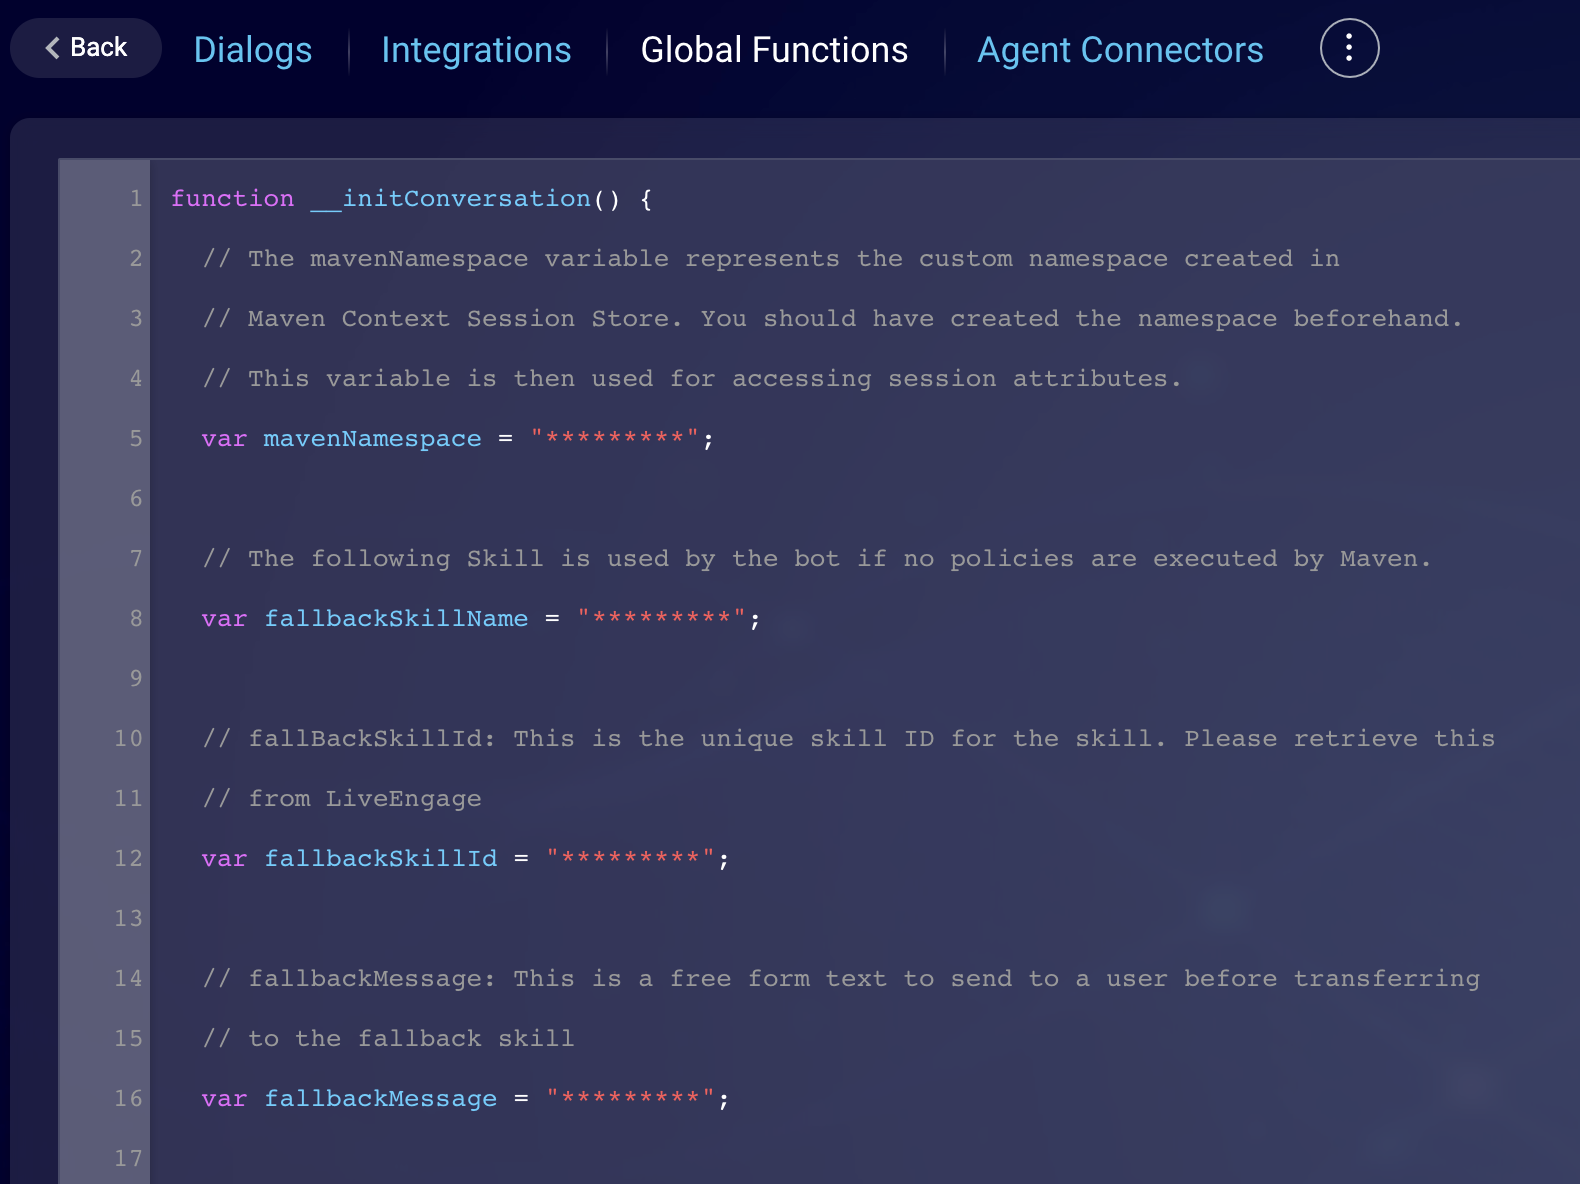 The Global Functions page with a list of fields to edit